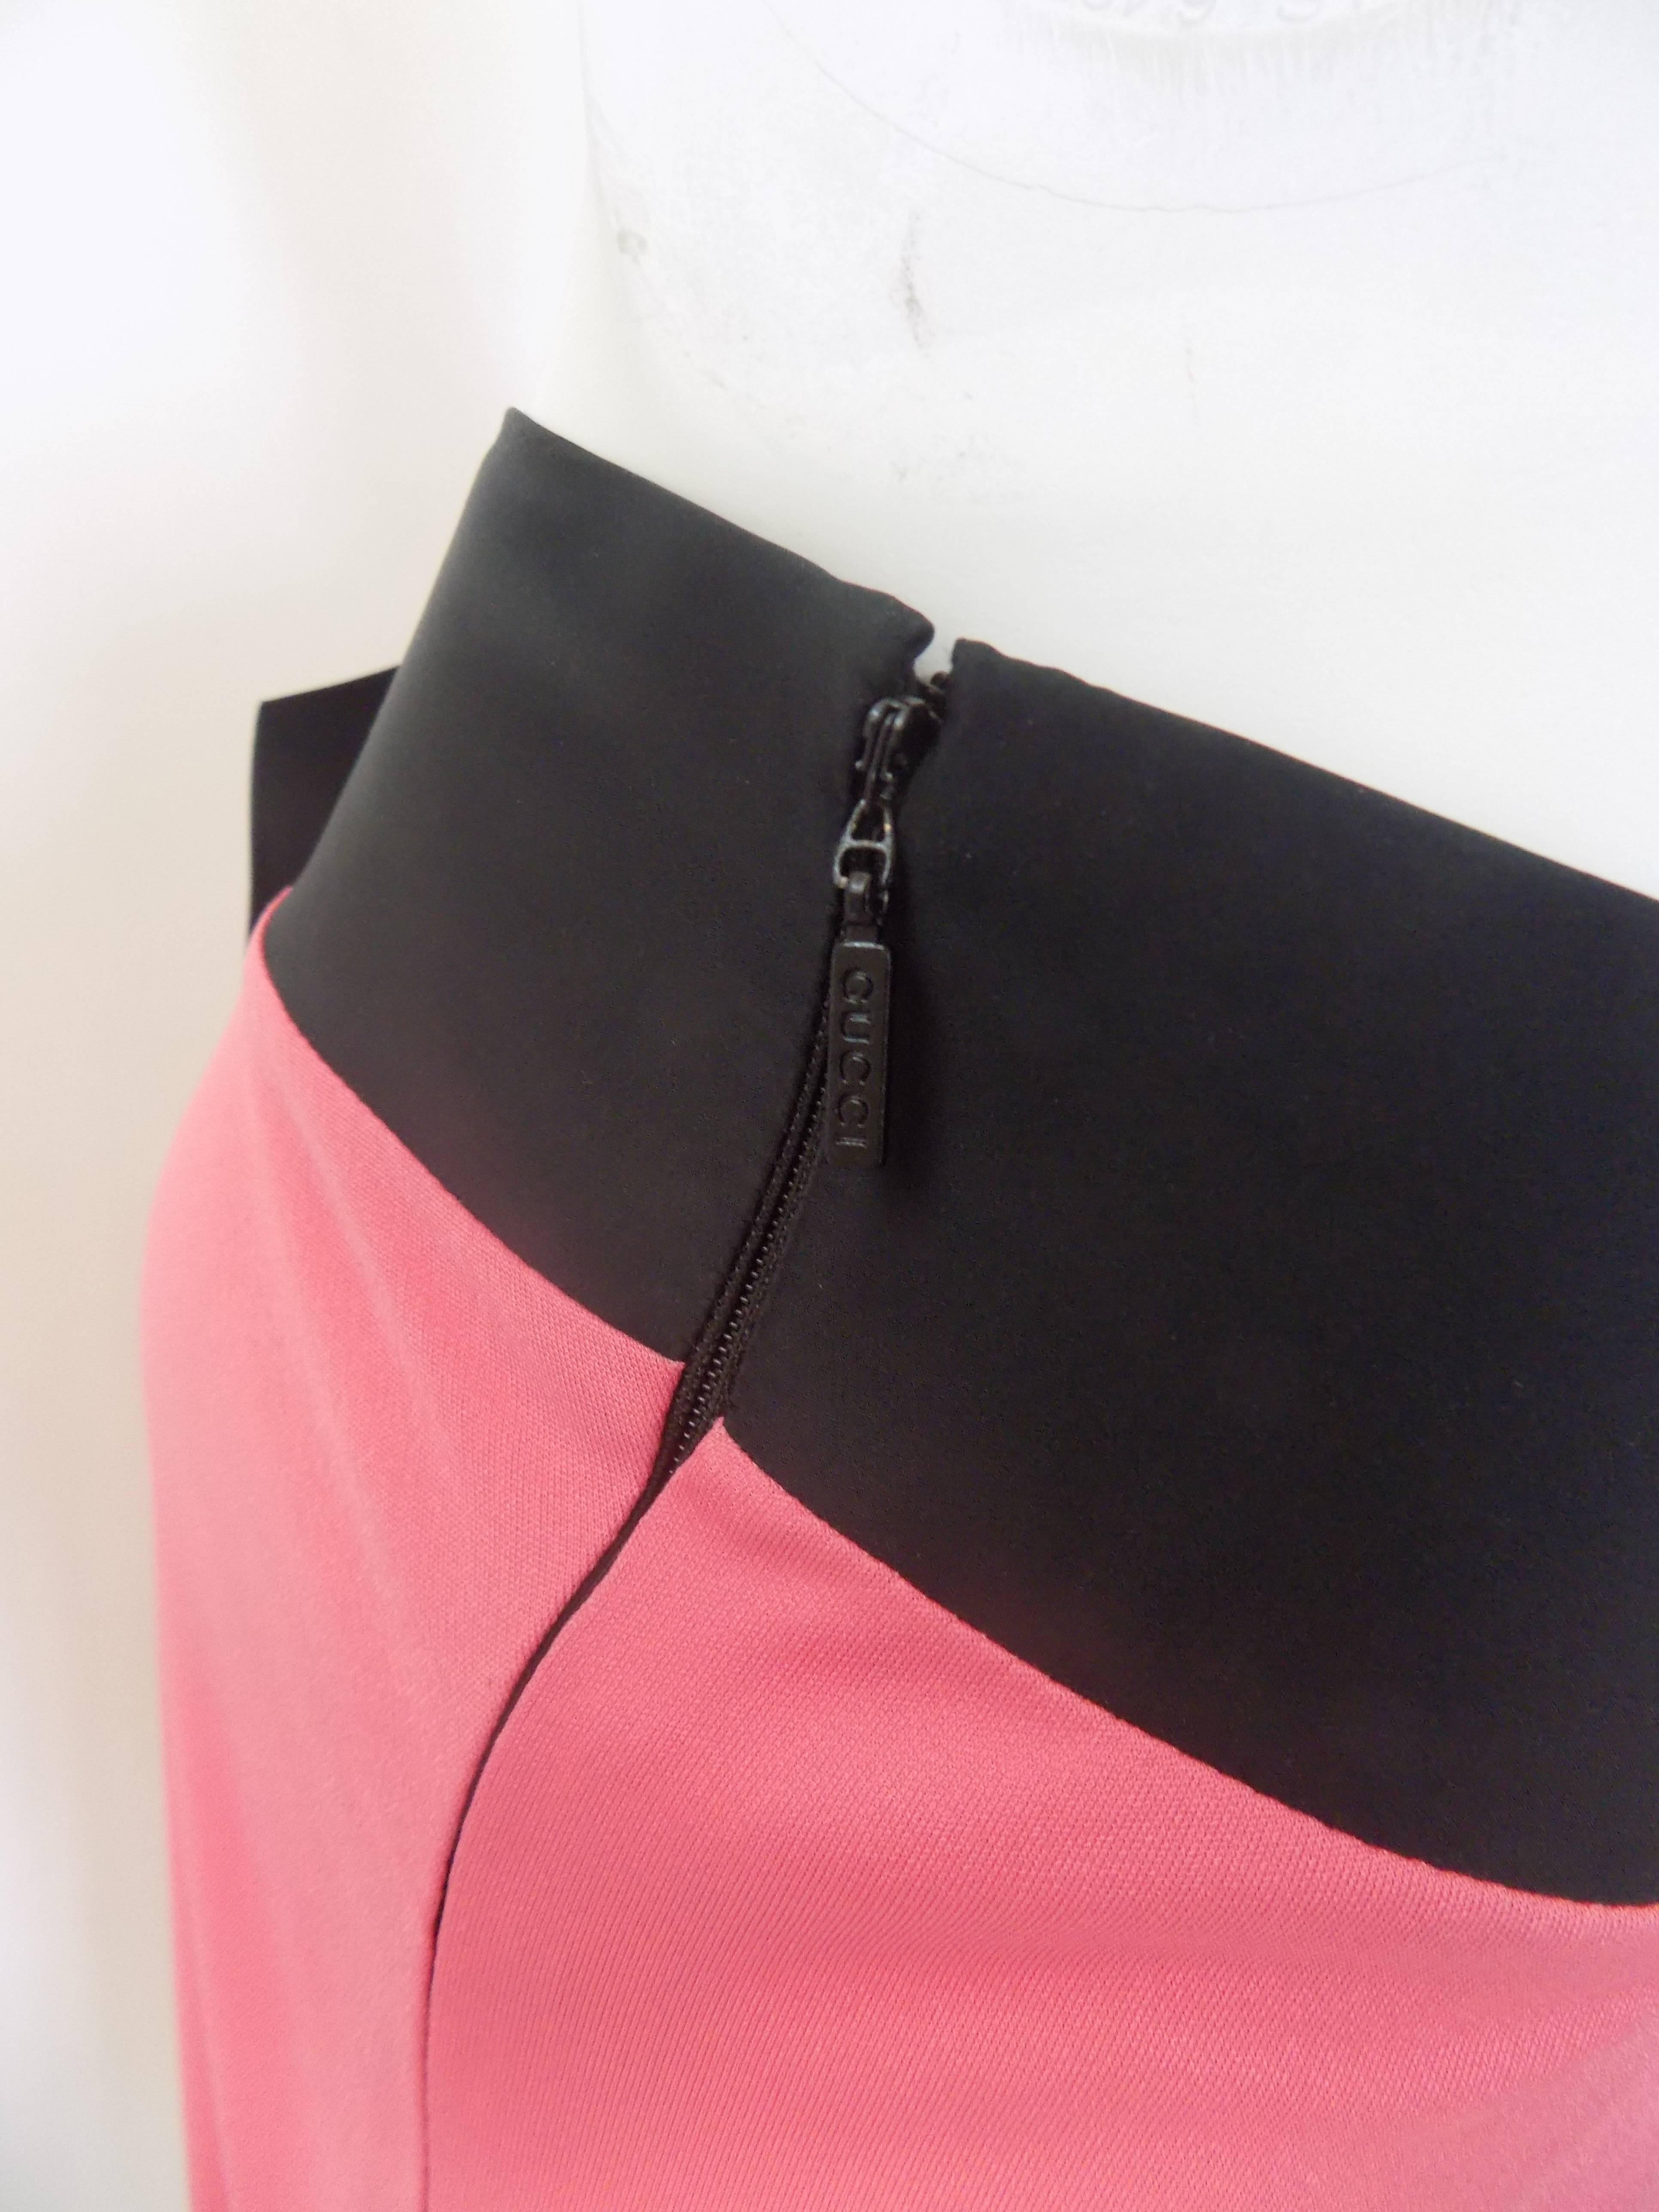 Gucci Pink Black Top In Excellent Condition For Sale In Capri, IT